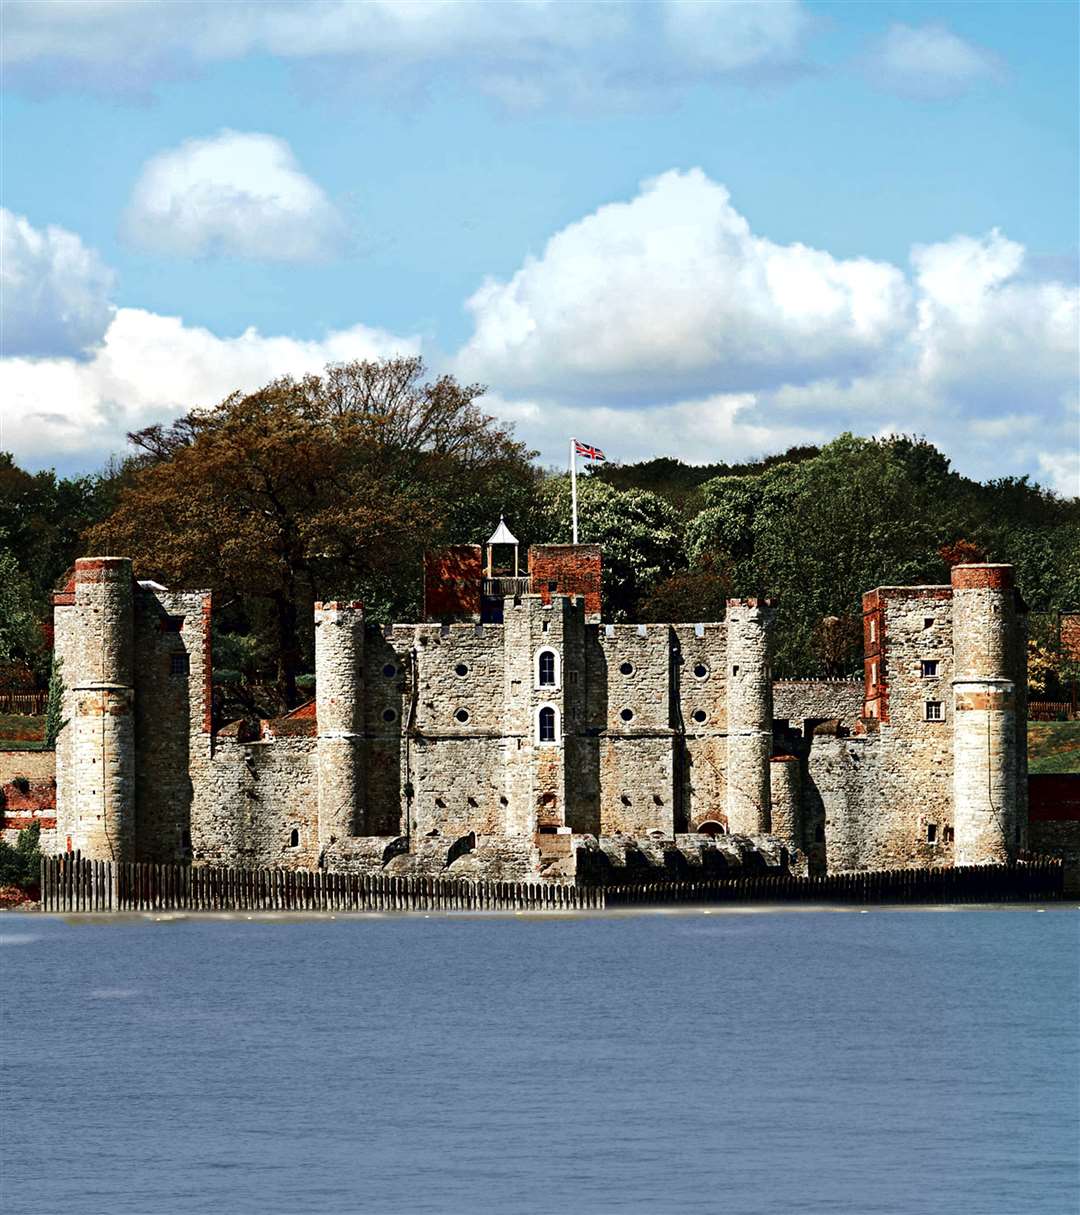 Upnor castle